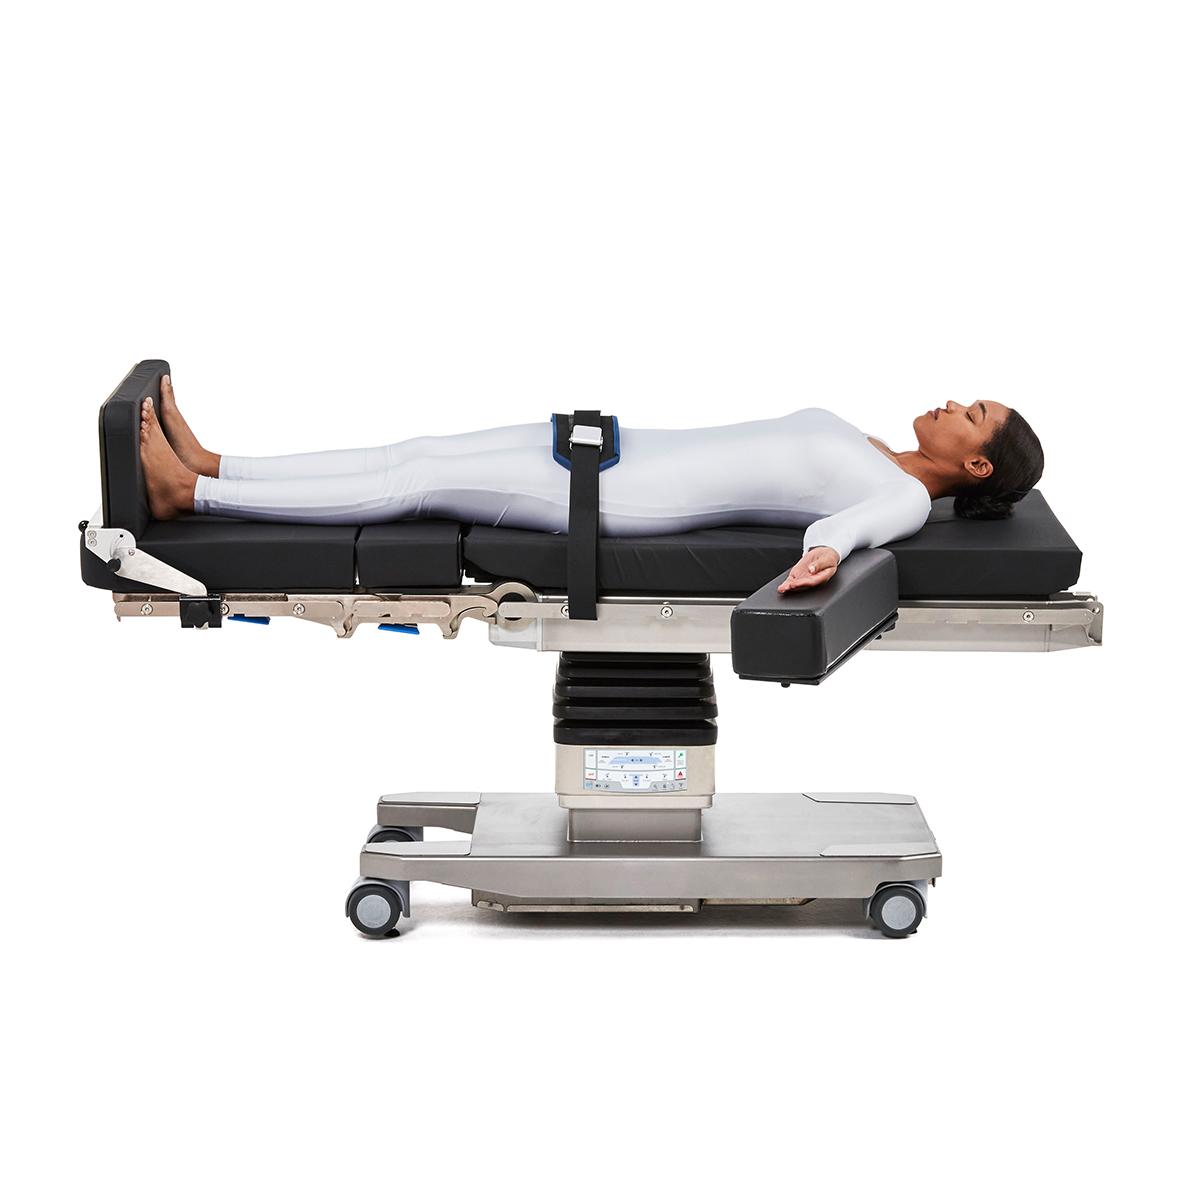 Patient positioned on Hillrom surgical table equipped with general accessories.